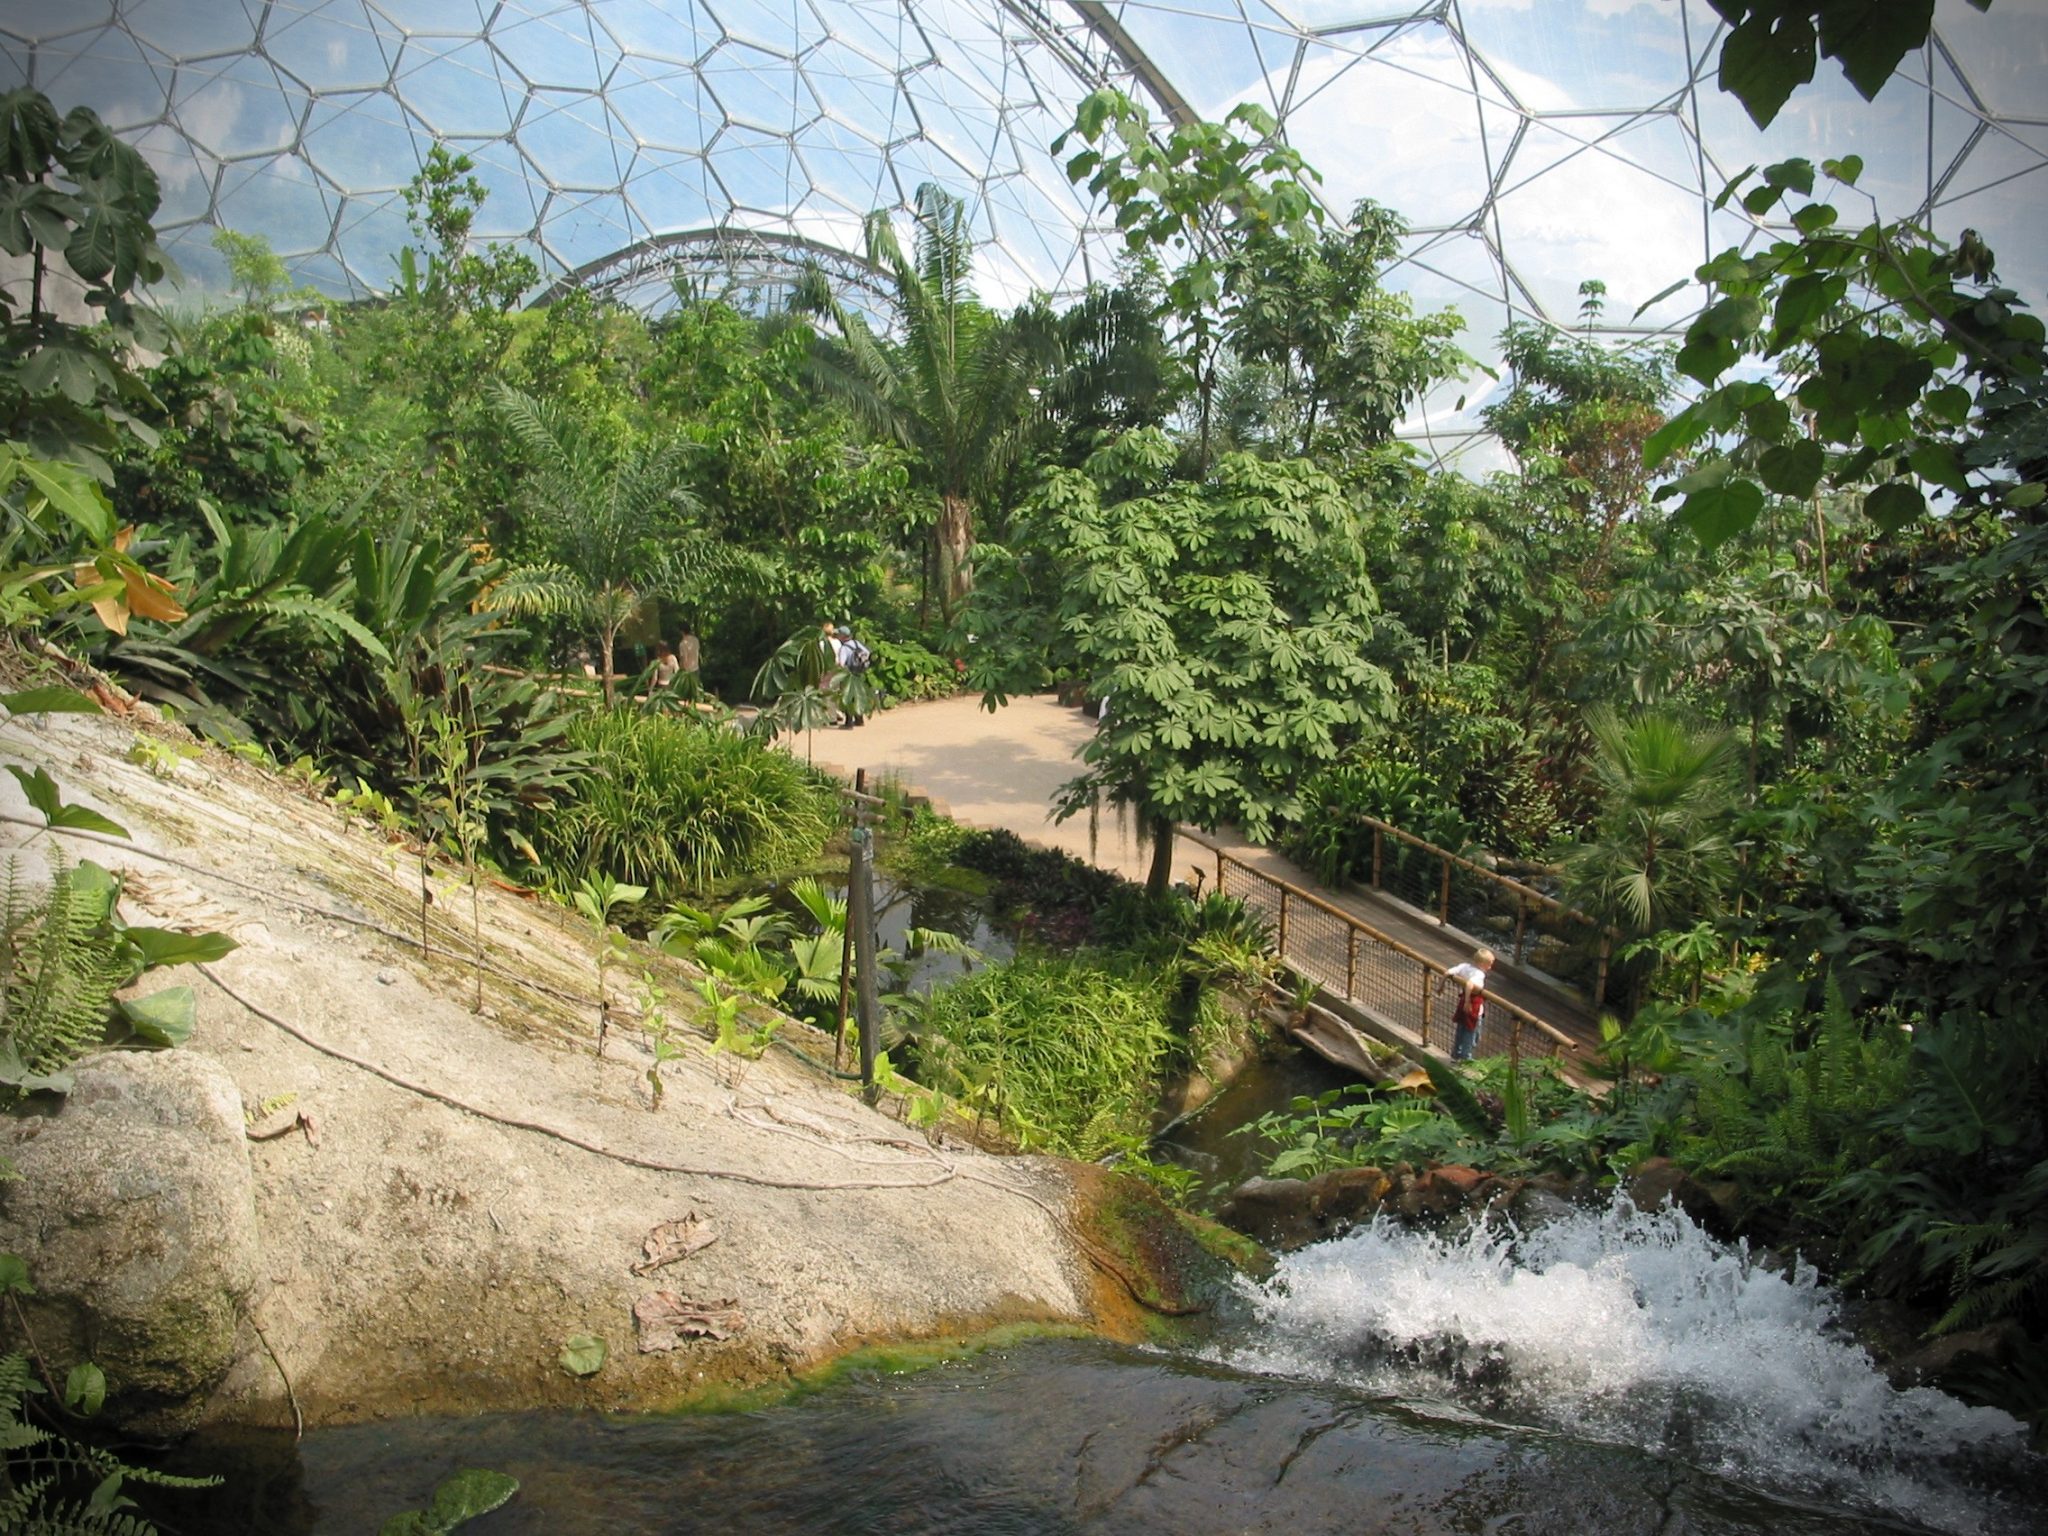 Cornwall, Eden Project